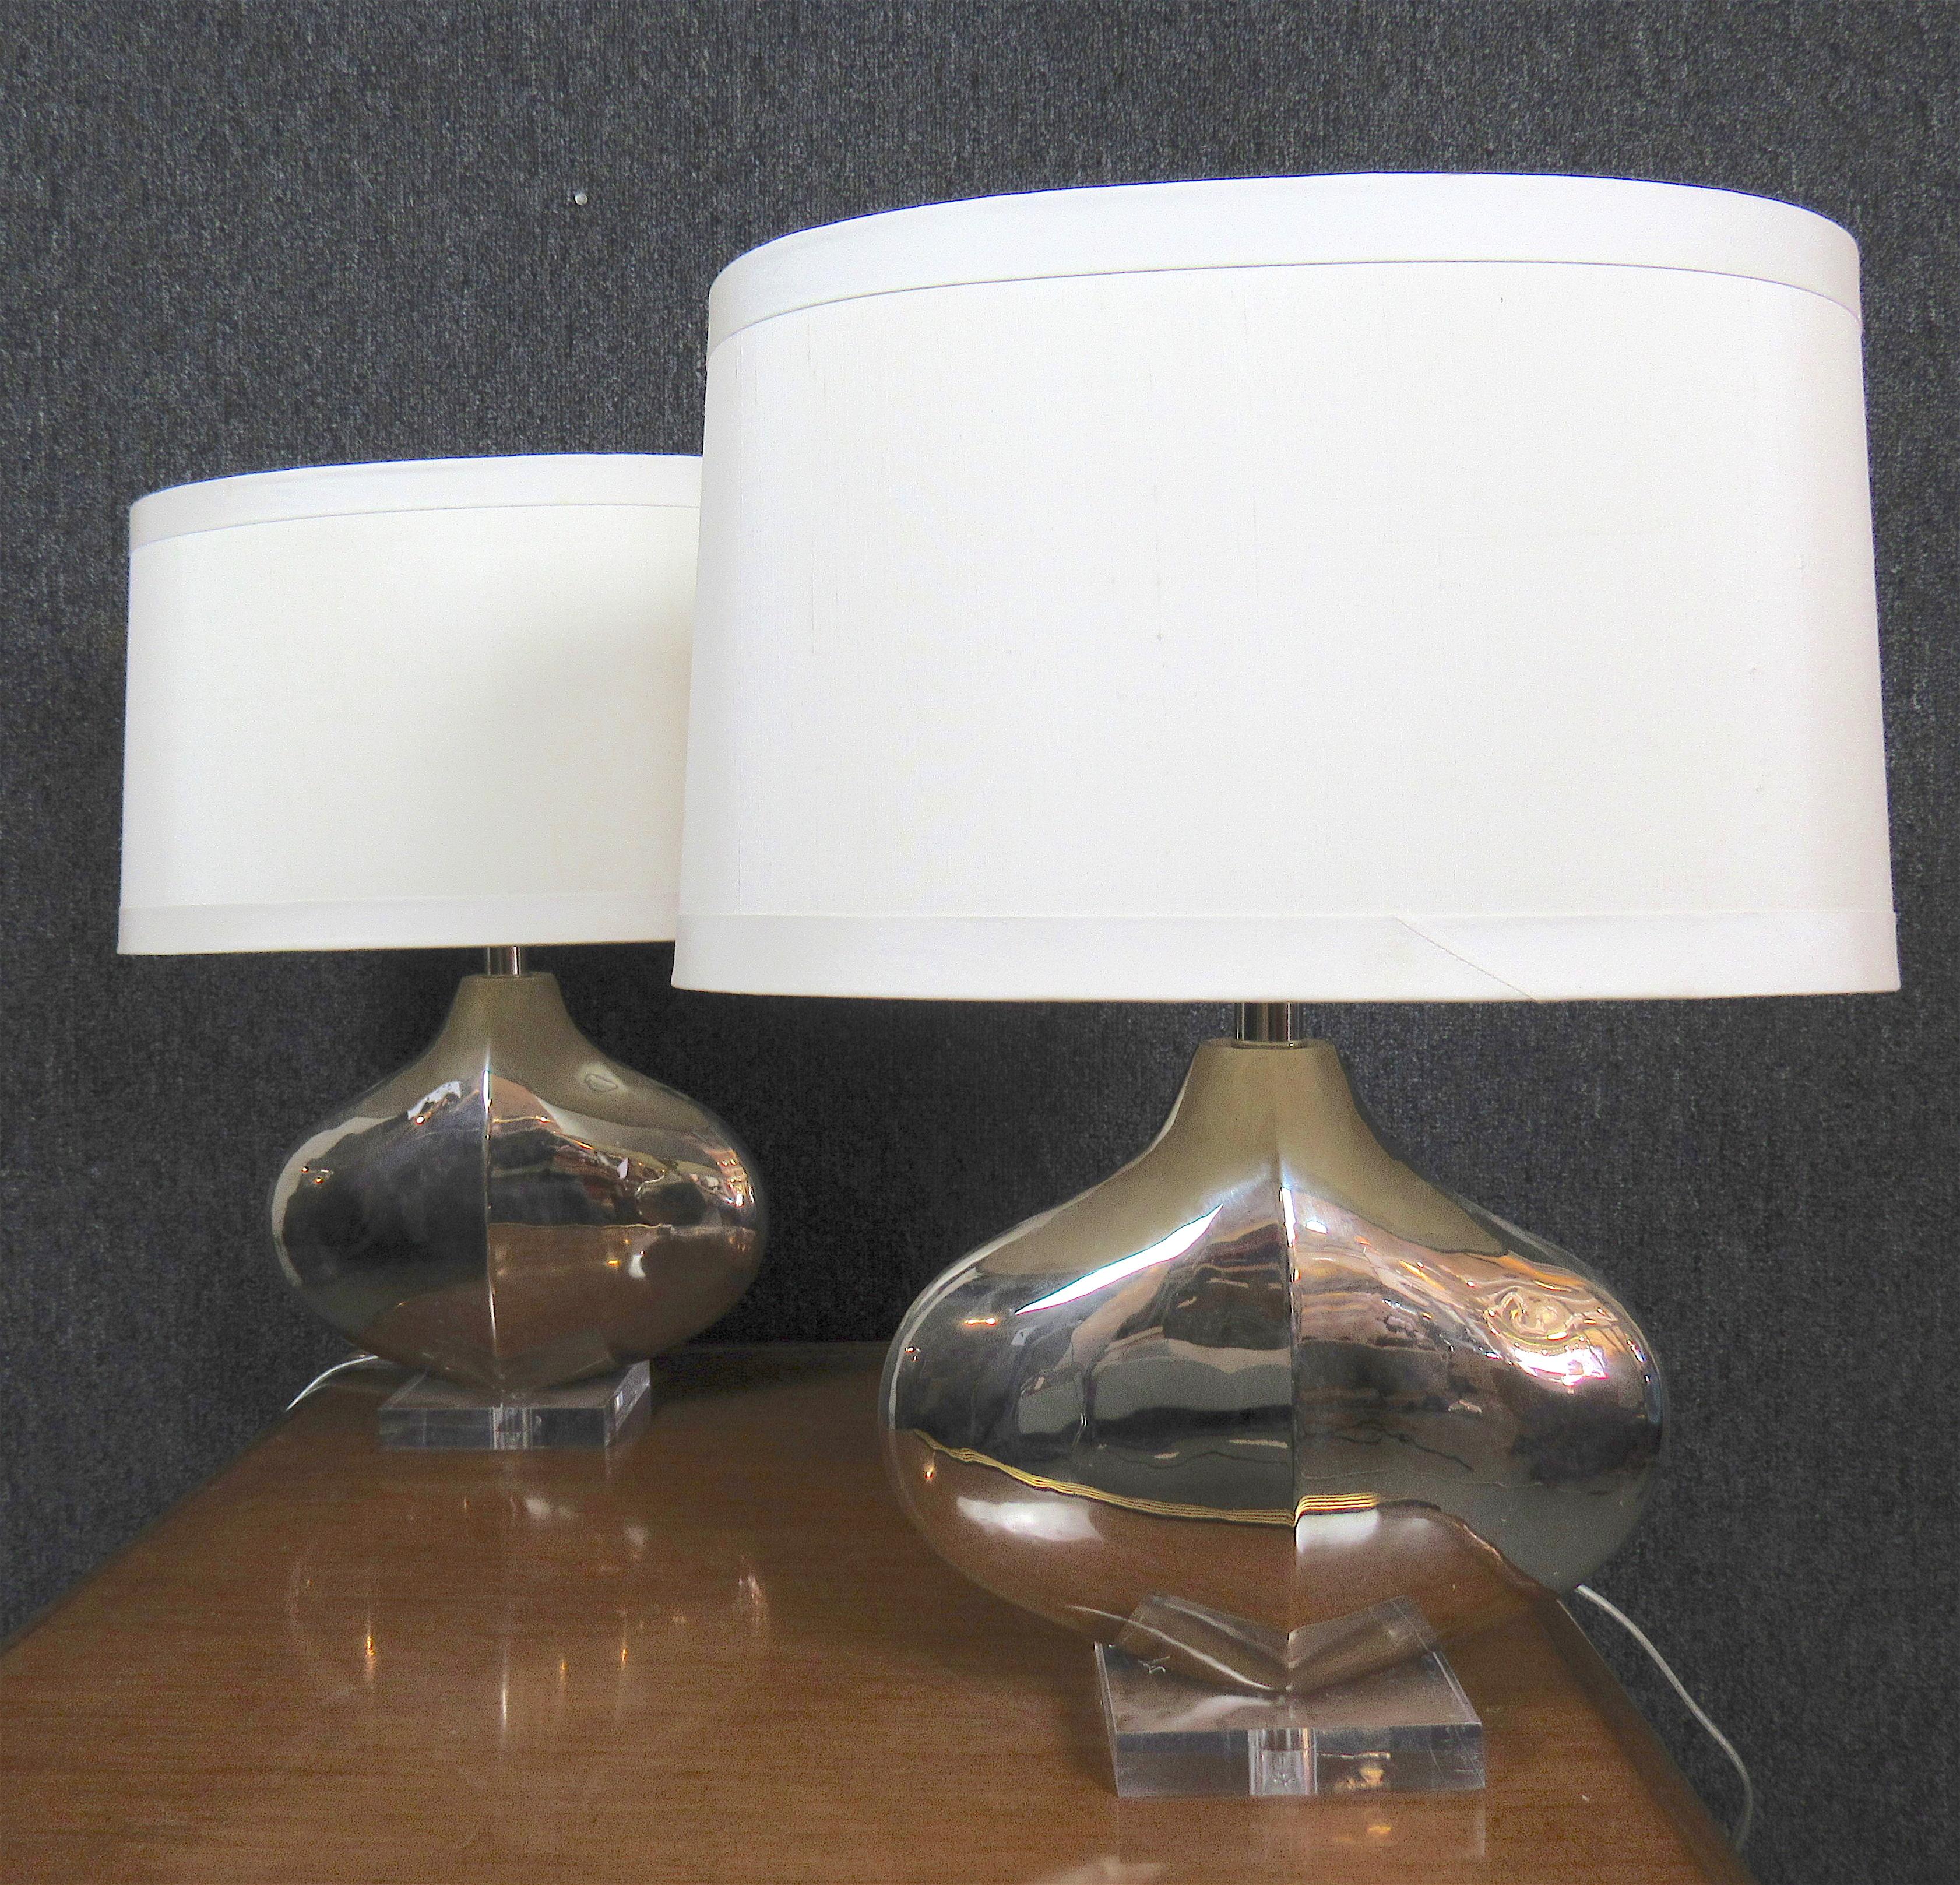 Pair of polished metal table lamps made by Tanner Kenzie. Tear drop shape lamp on clear acrylic base.
Please confirm location NY or NJ